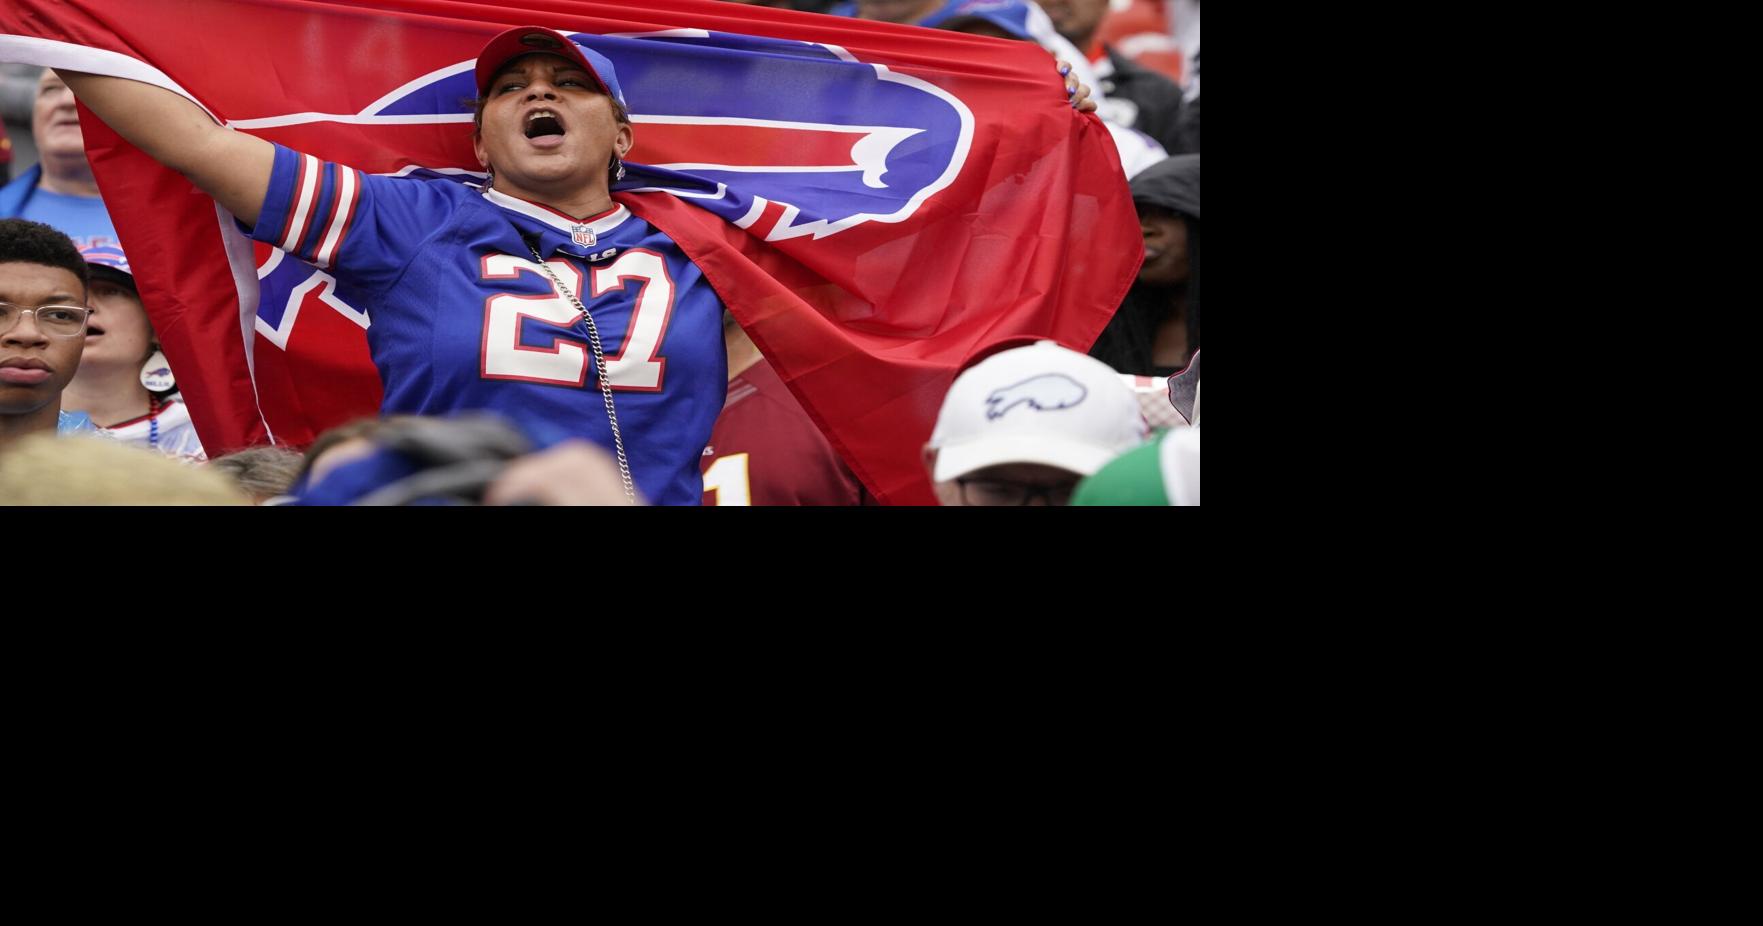 Bills fans' lifelong passion featured in Visa commercial